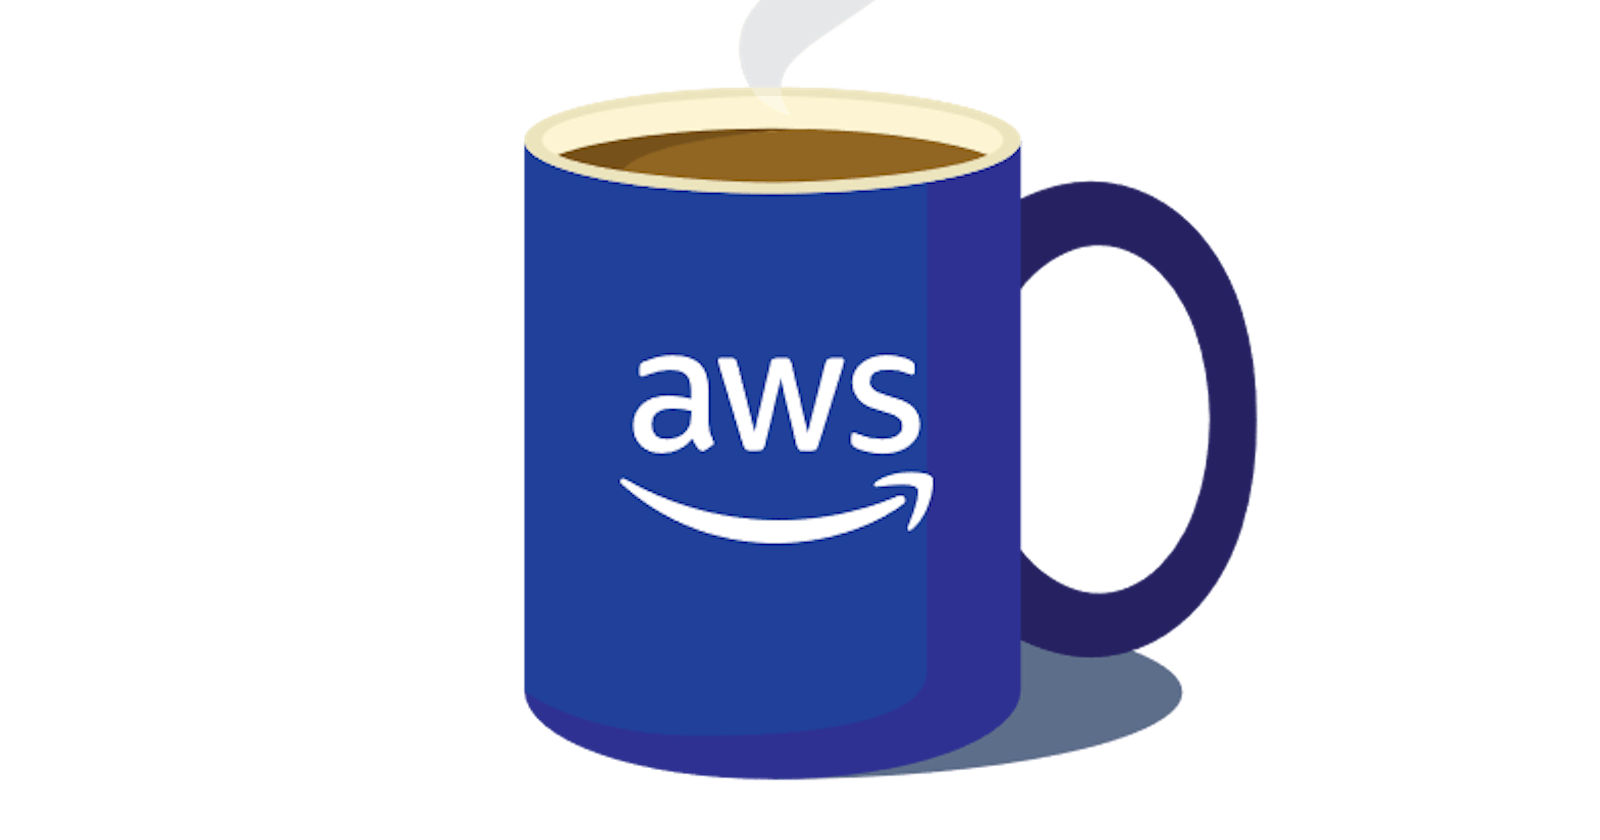 How to prepare for AWS Cloud Practitioner exam